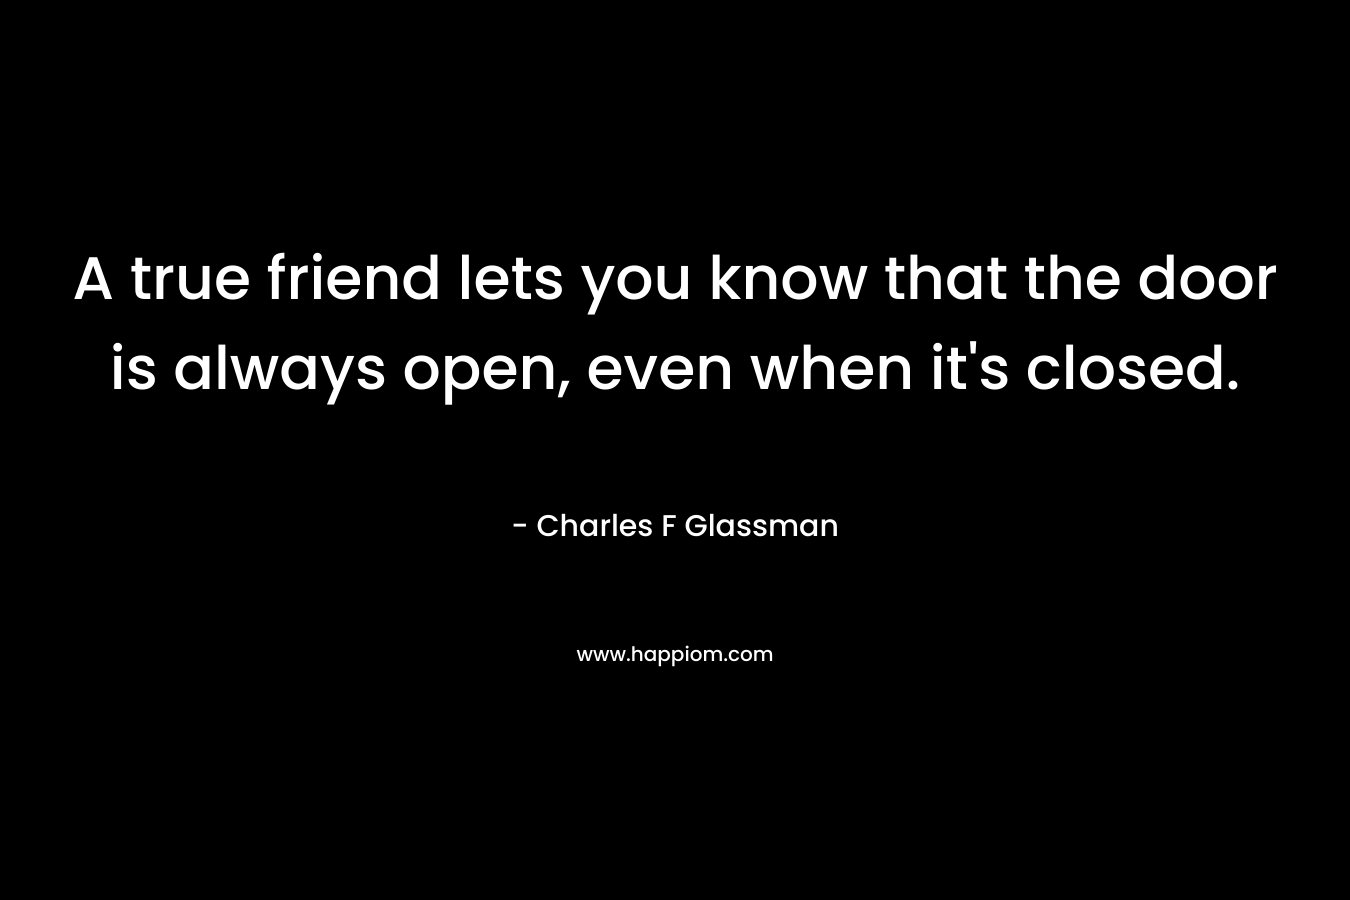 A true friend lets you know that the door is always open, even when it's closed.